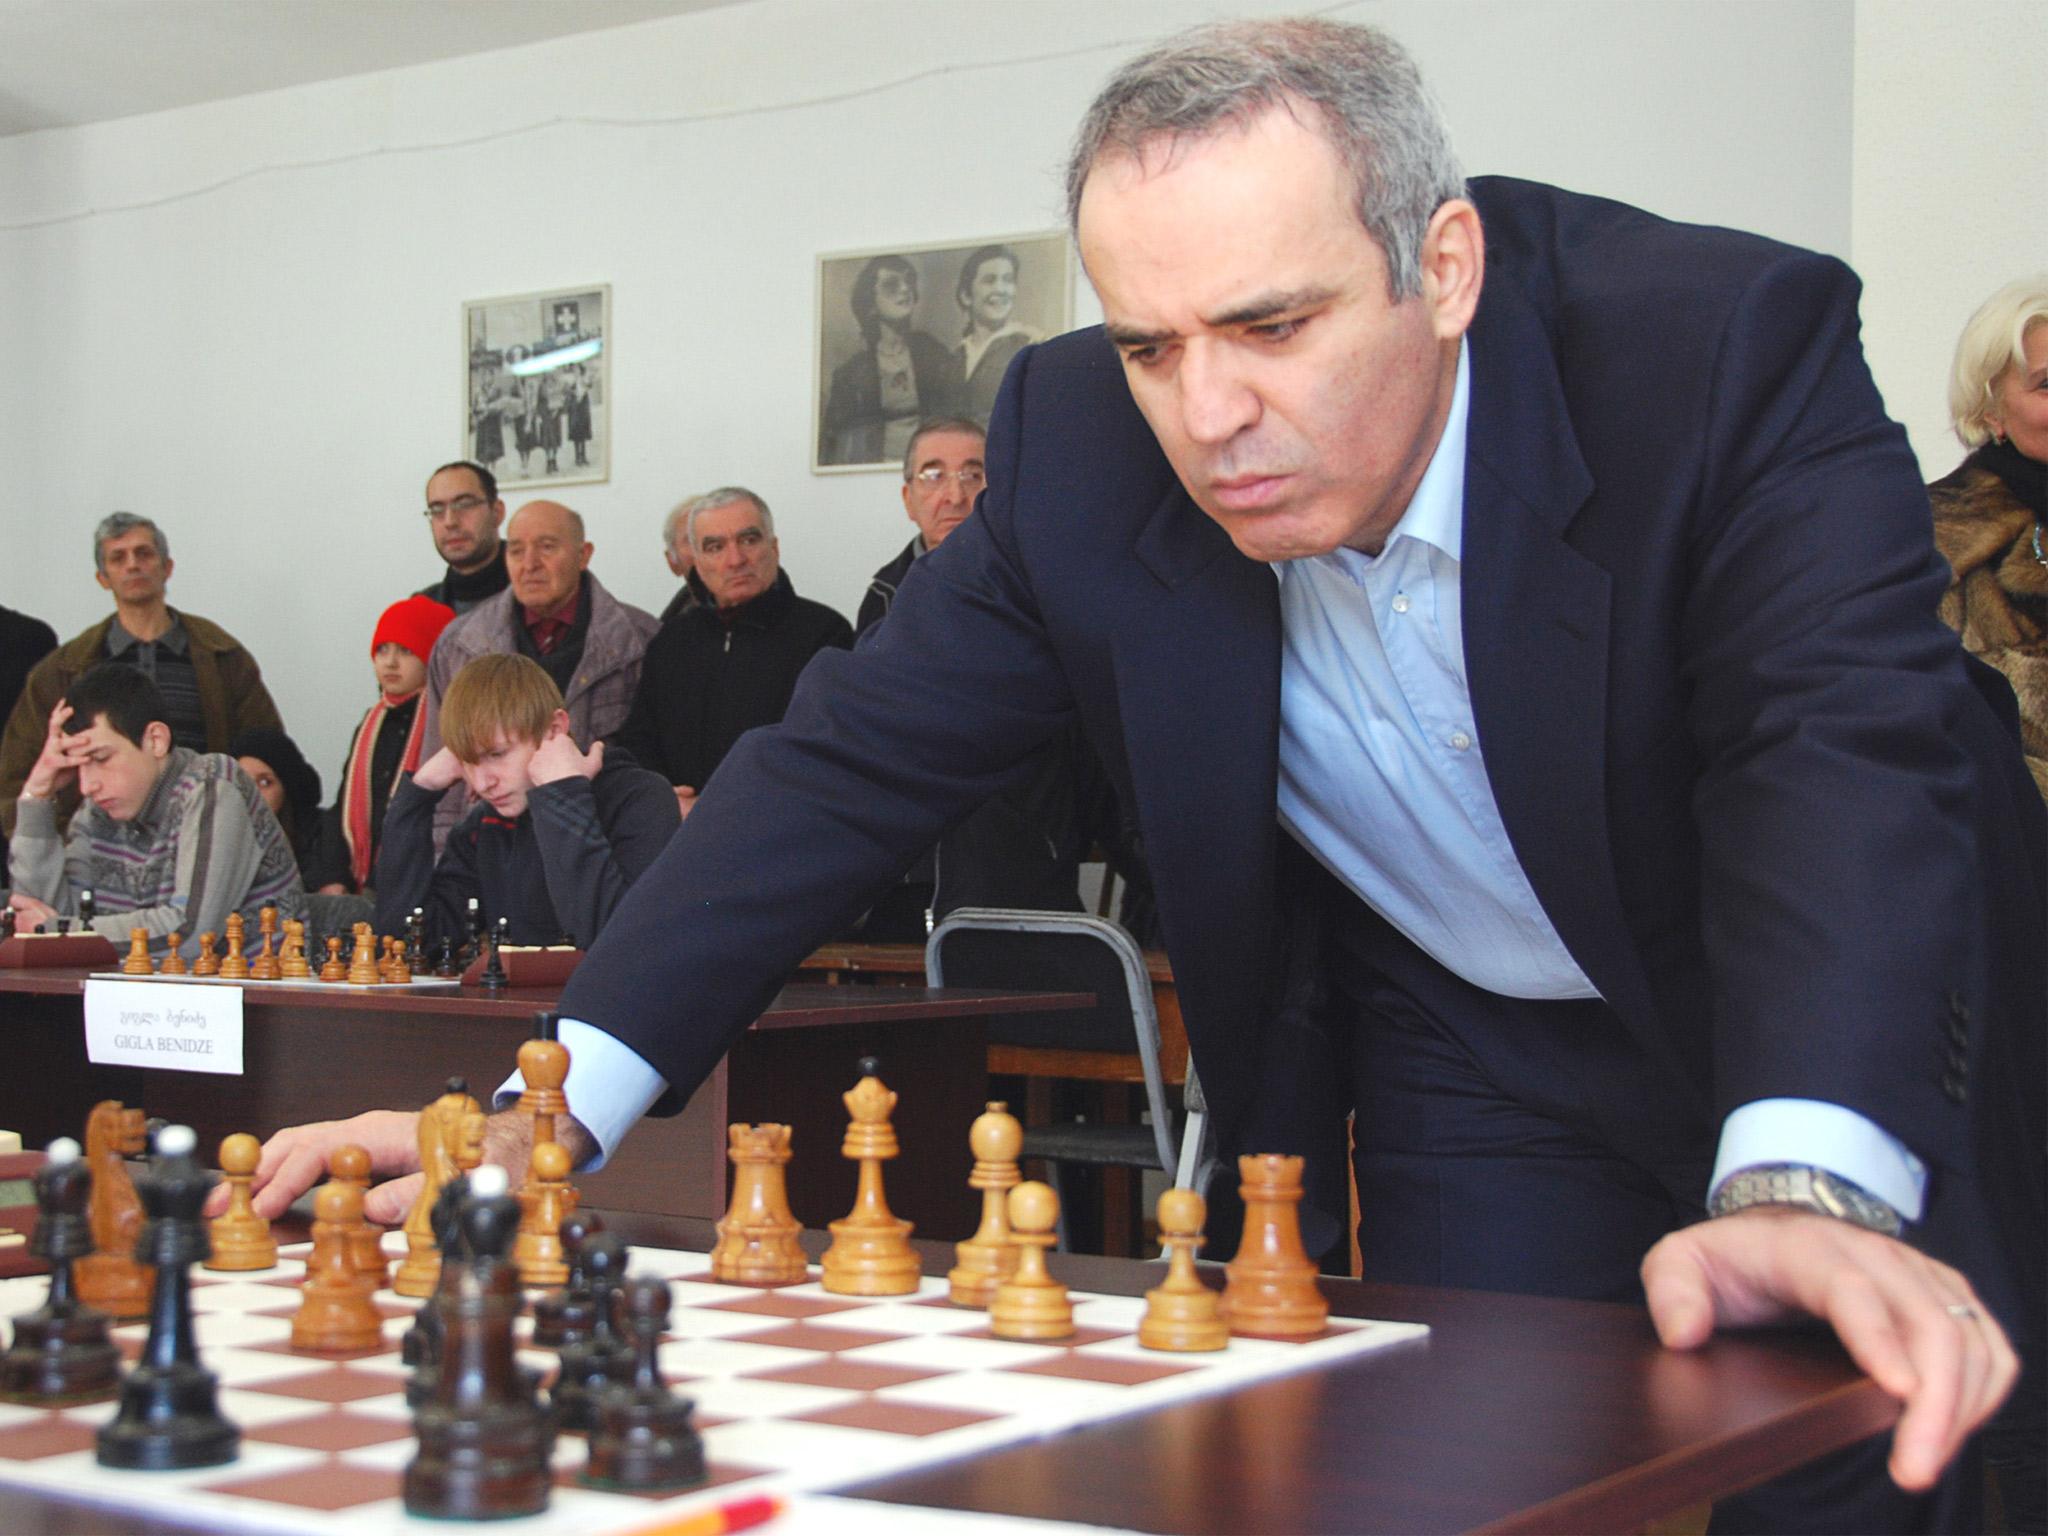 2022 Chess Olympiad to be moved from Moscow